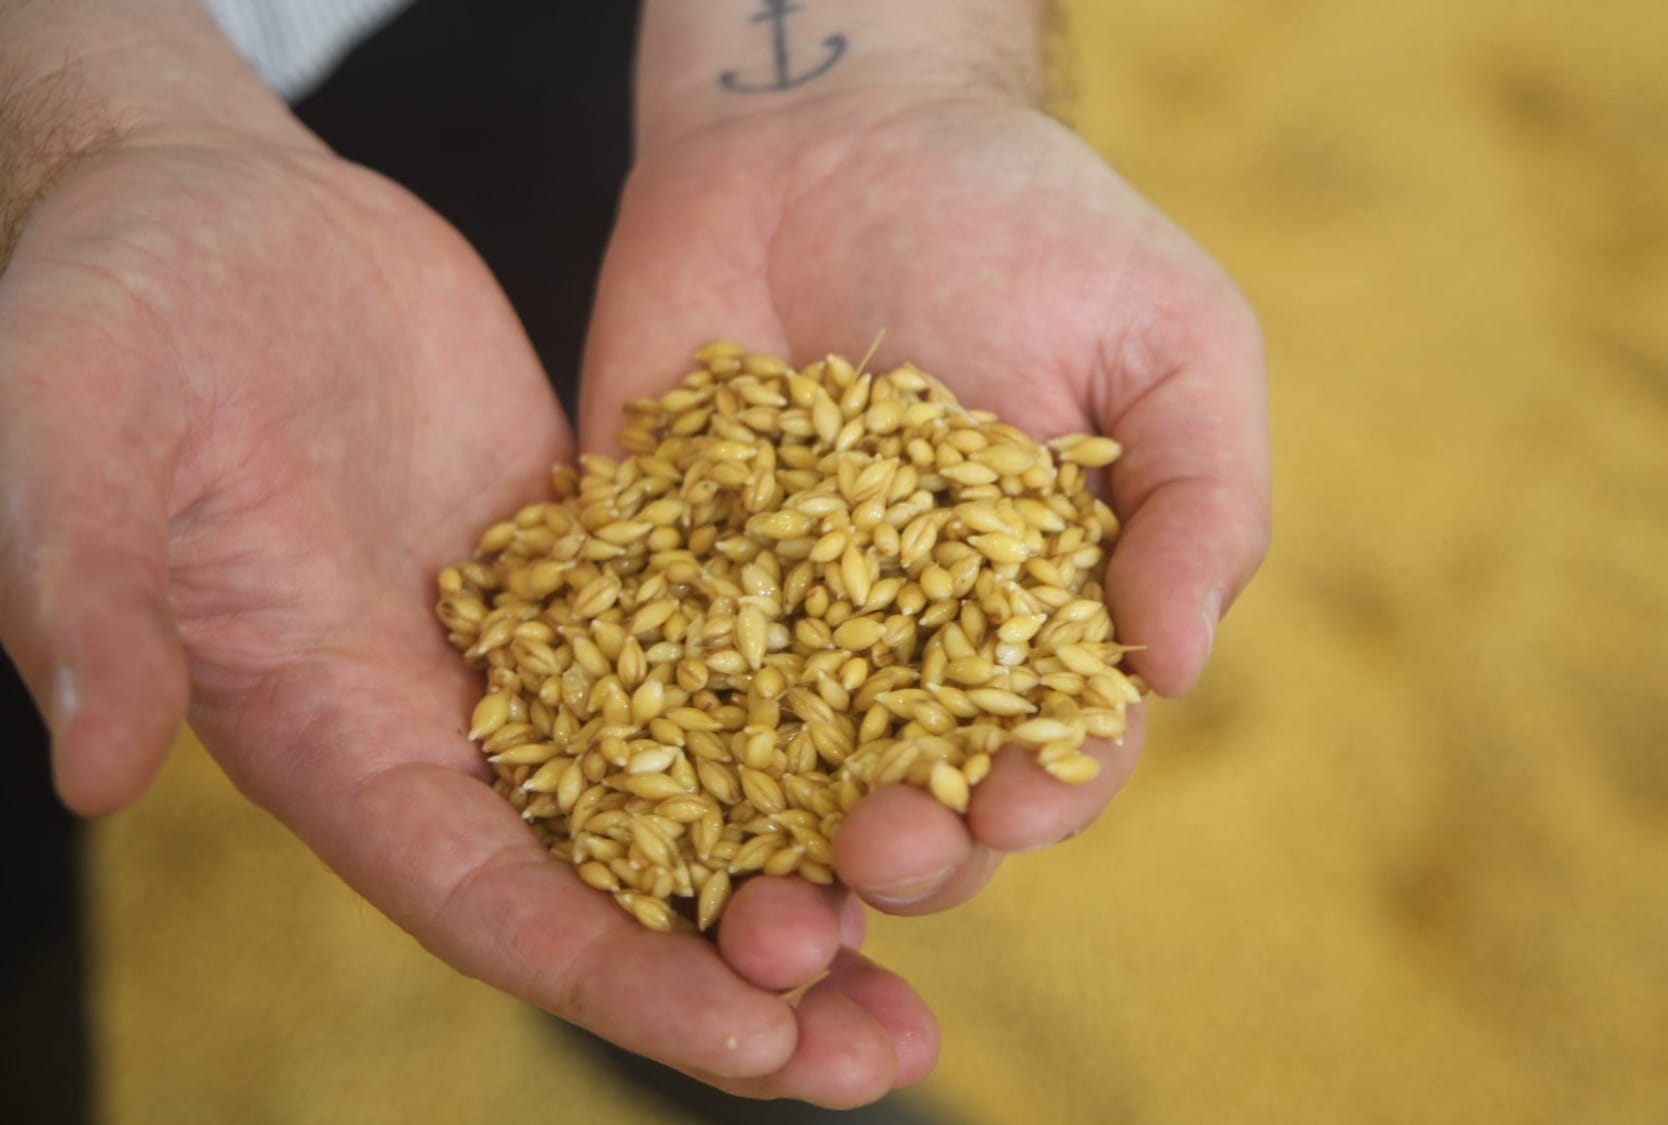 Two hands holding a small amount of malted barley